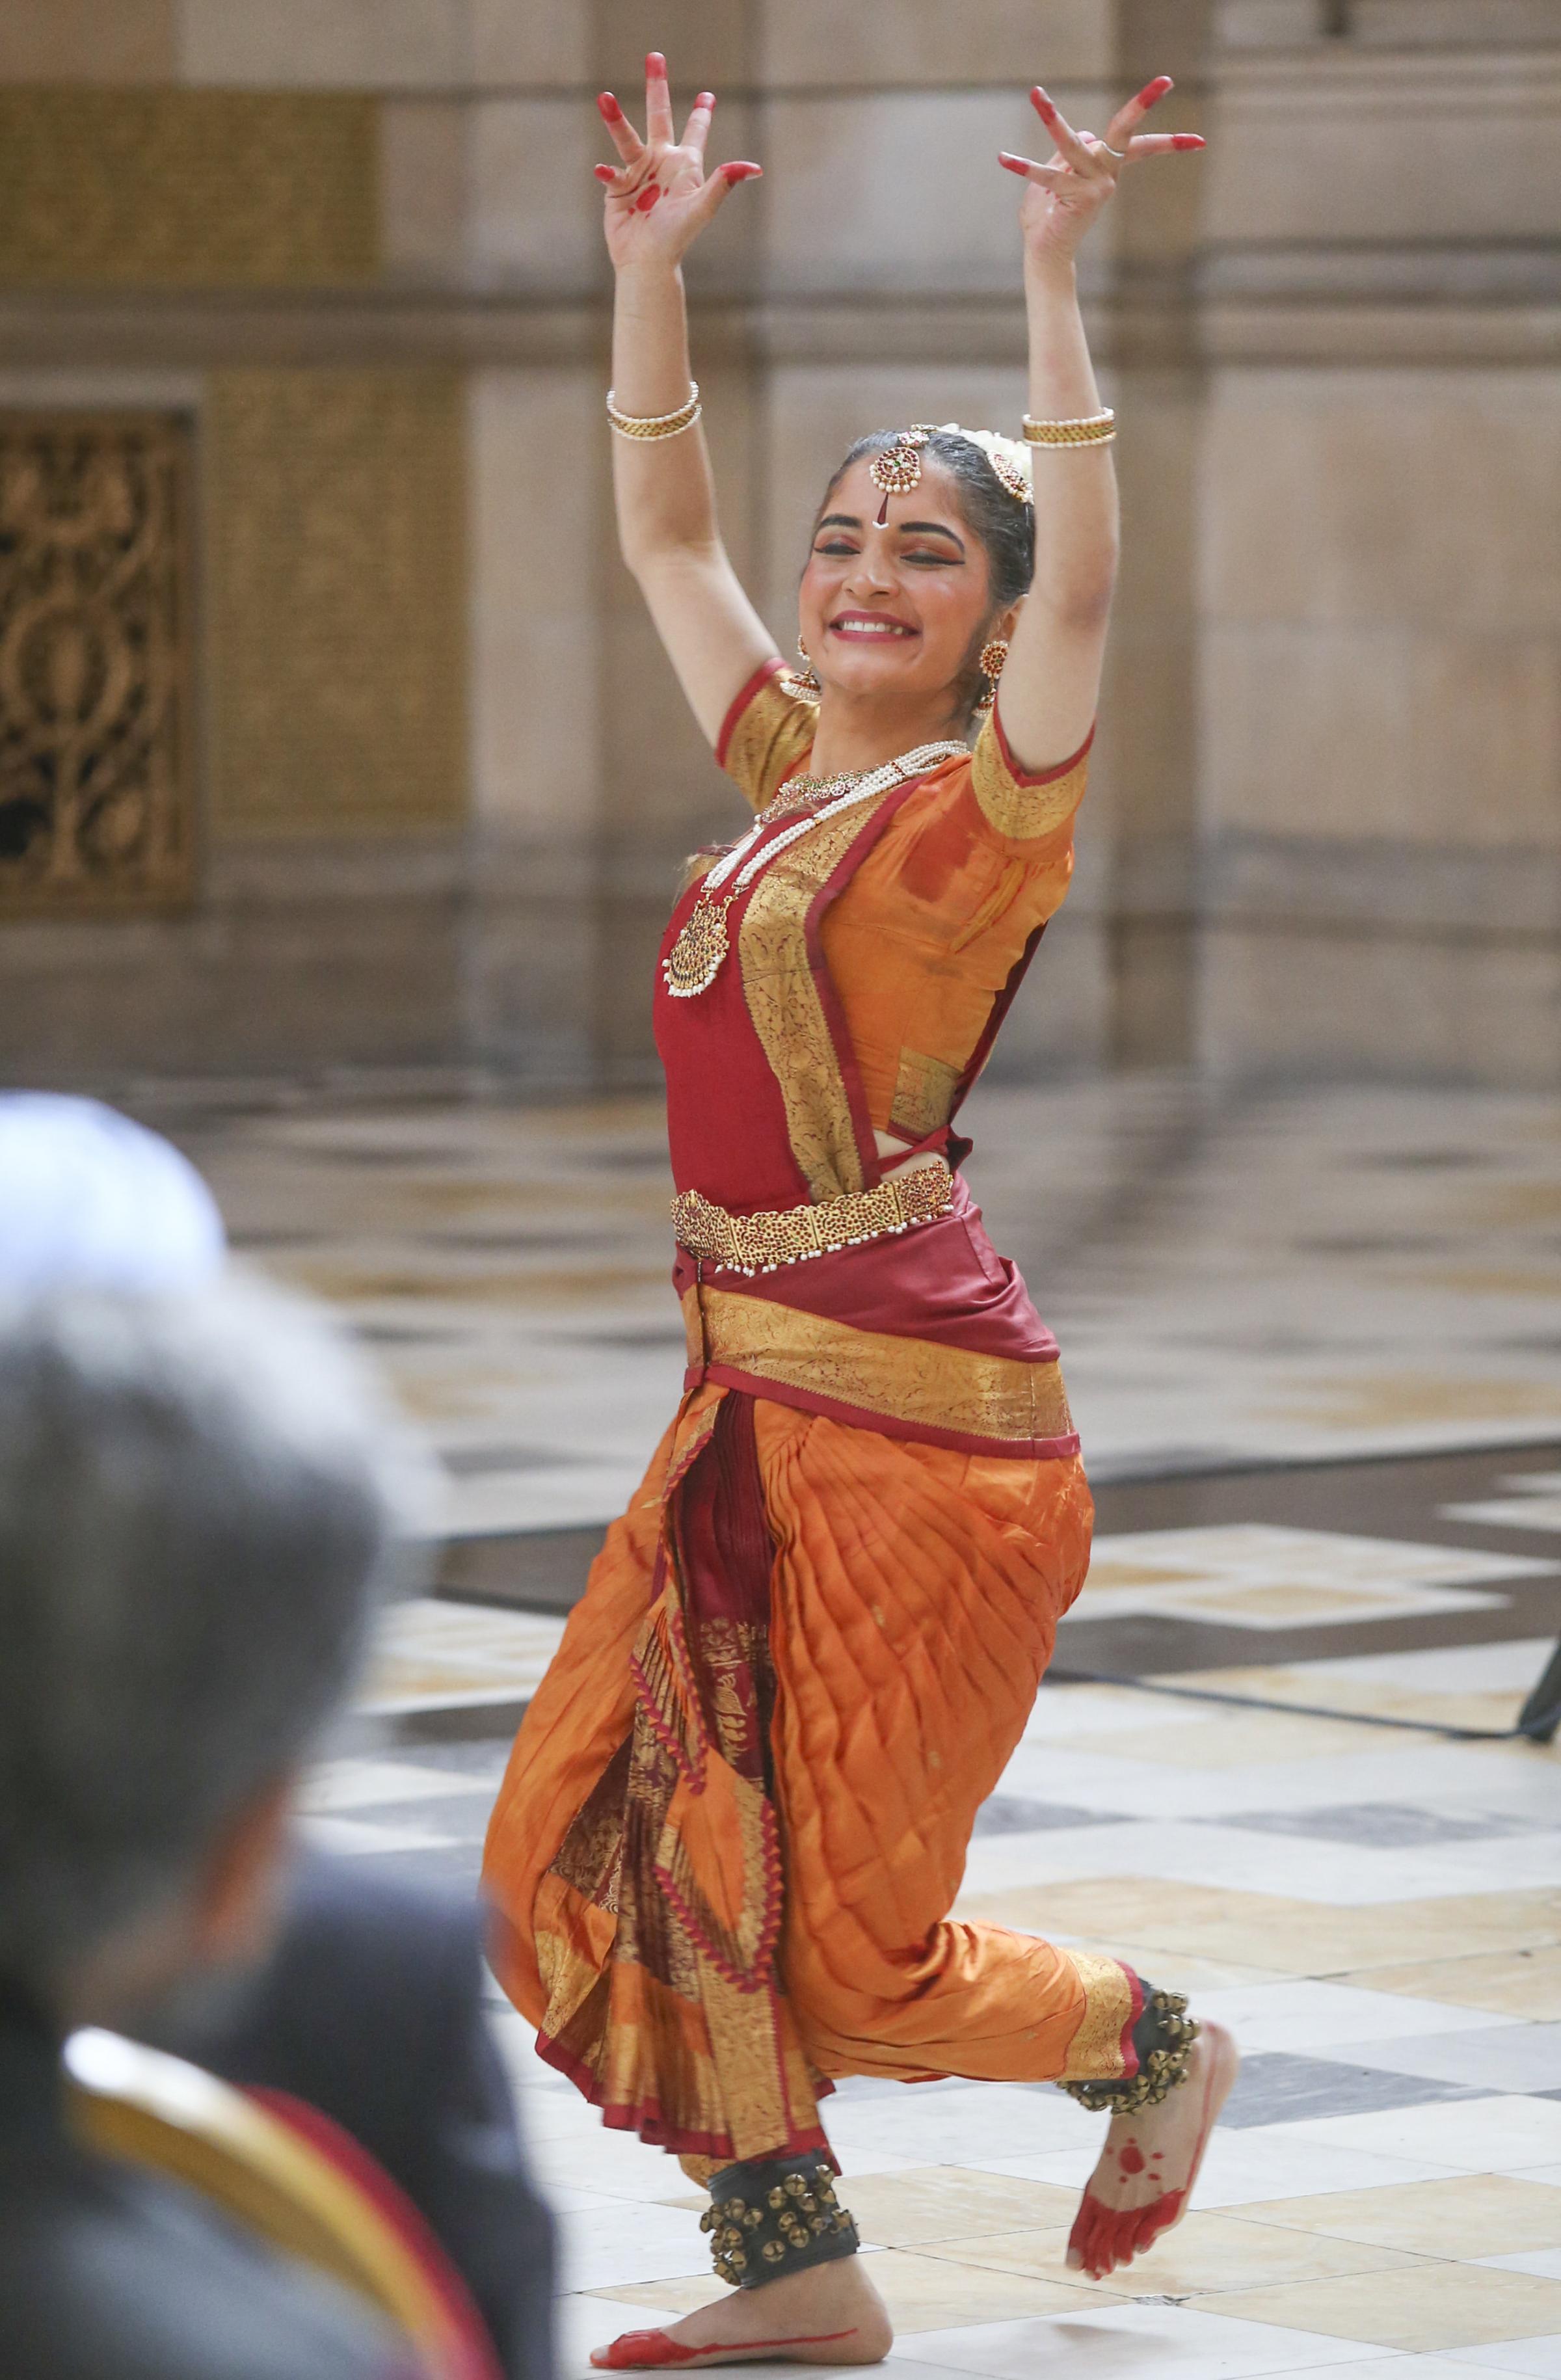 Dancer Panchami Chandukudlu at a signing ceremony at Kelvingrove Art Gallery in Glasgow to mark the return of seven Indian antiquities from the city collection. Photo by Gordon Terris.